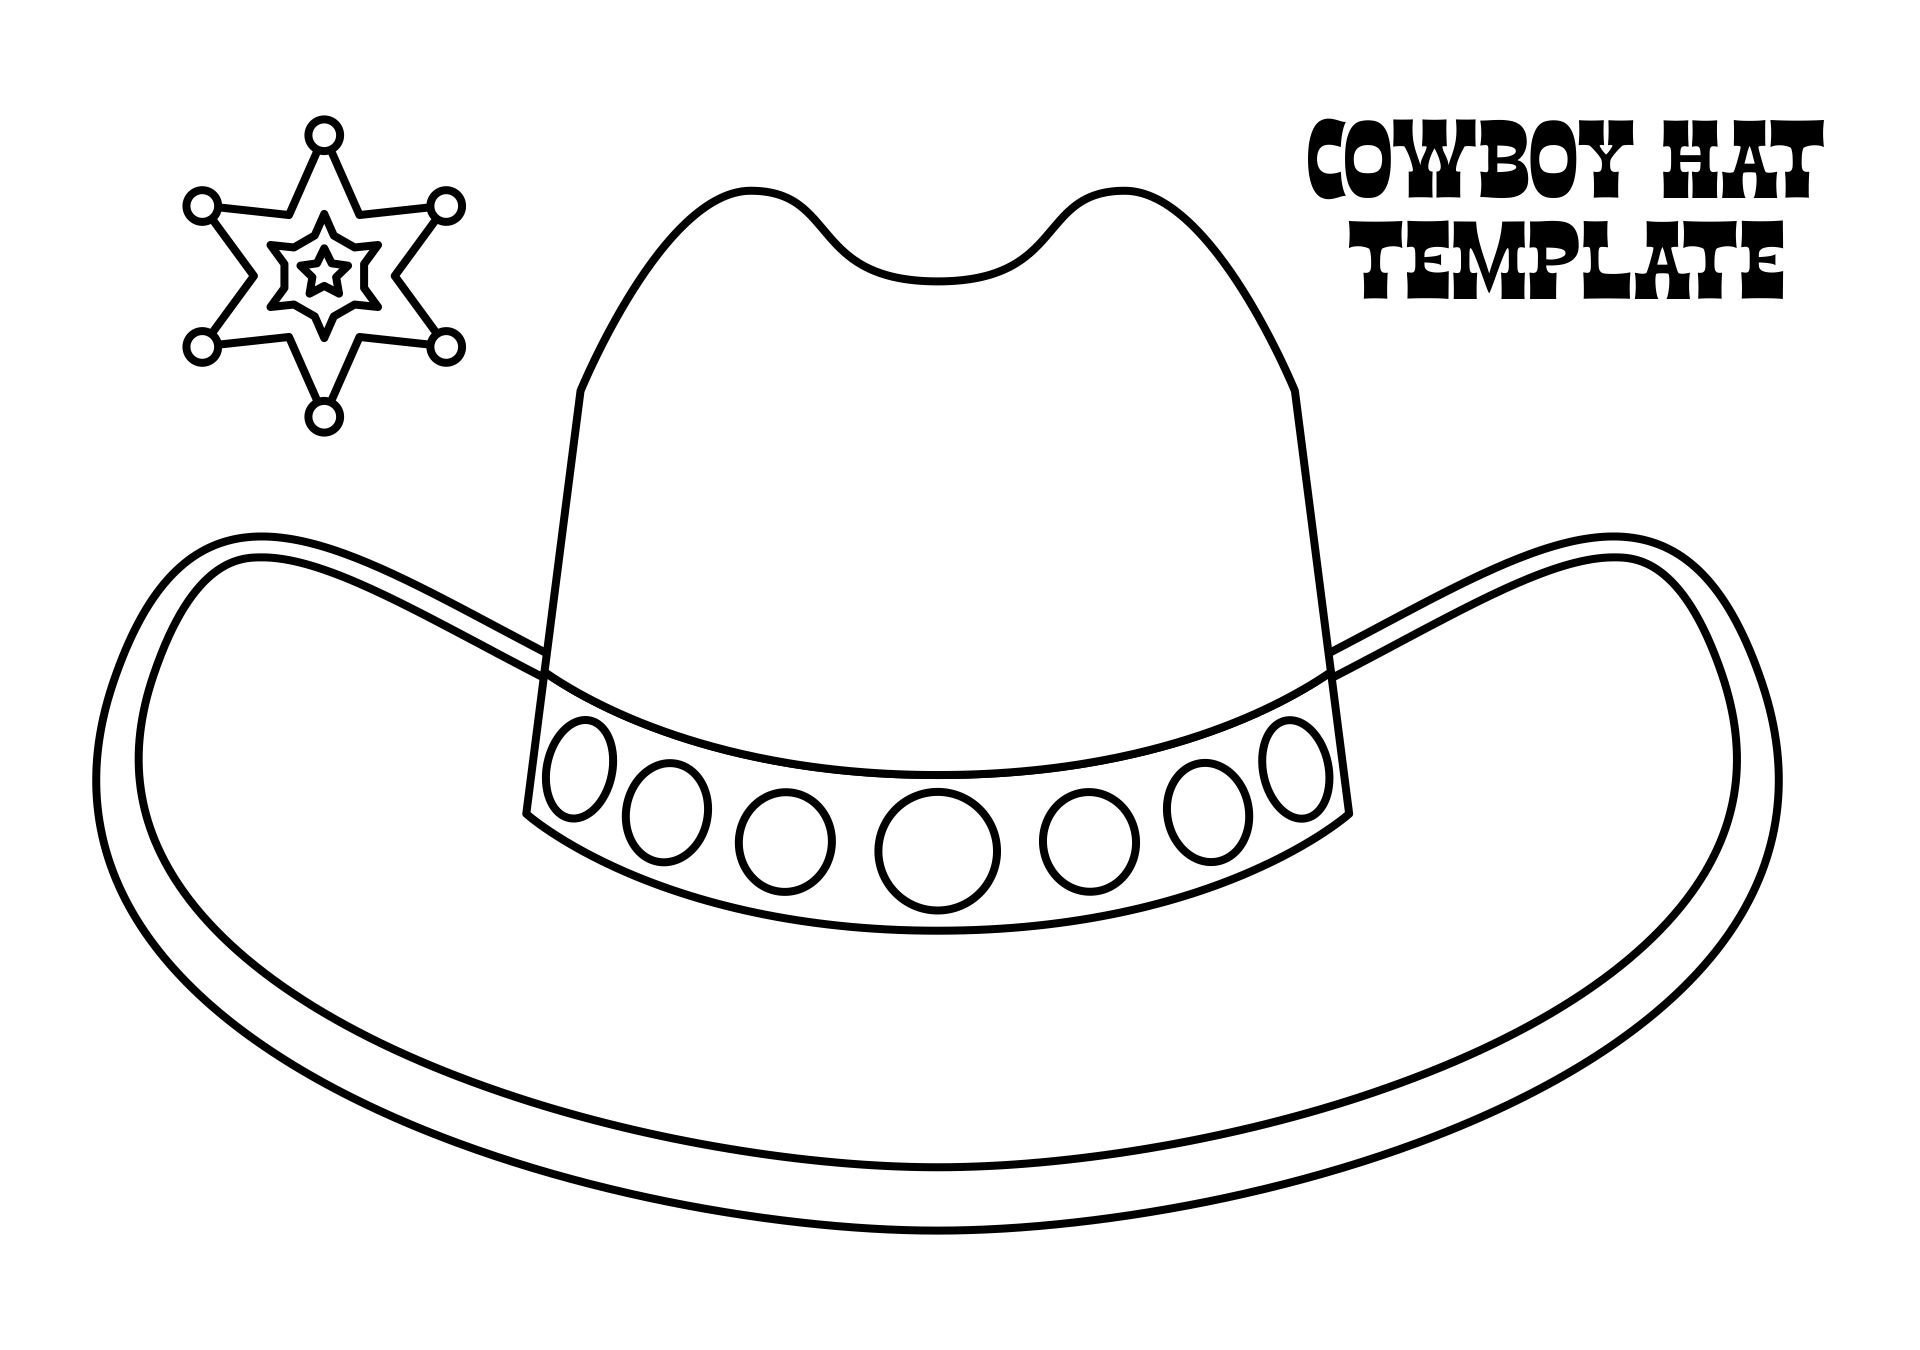 7 Best Images Of Cowboy Hat Printable Template Cowboy Hat Applique Design Cowboy Printable